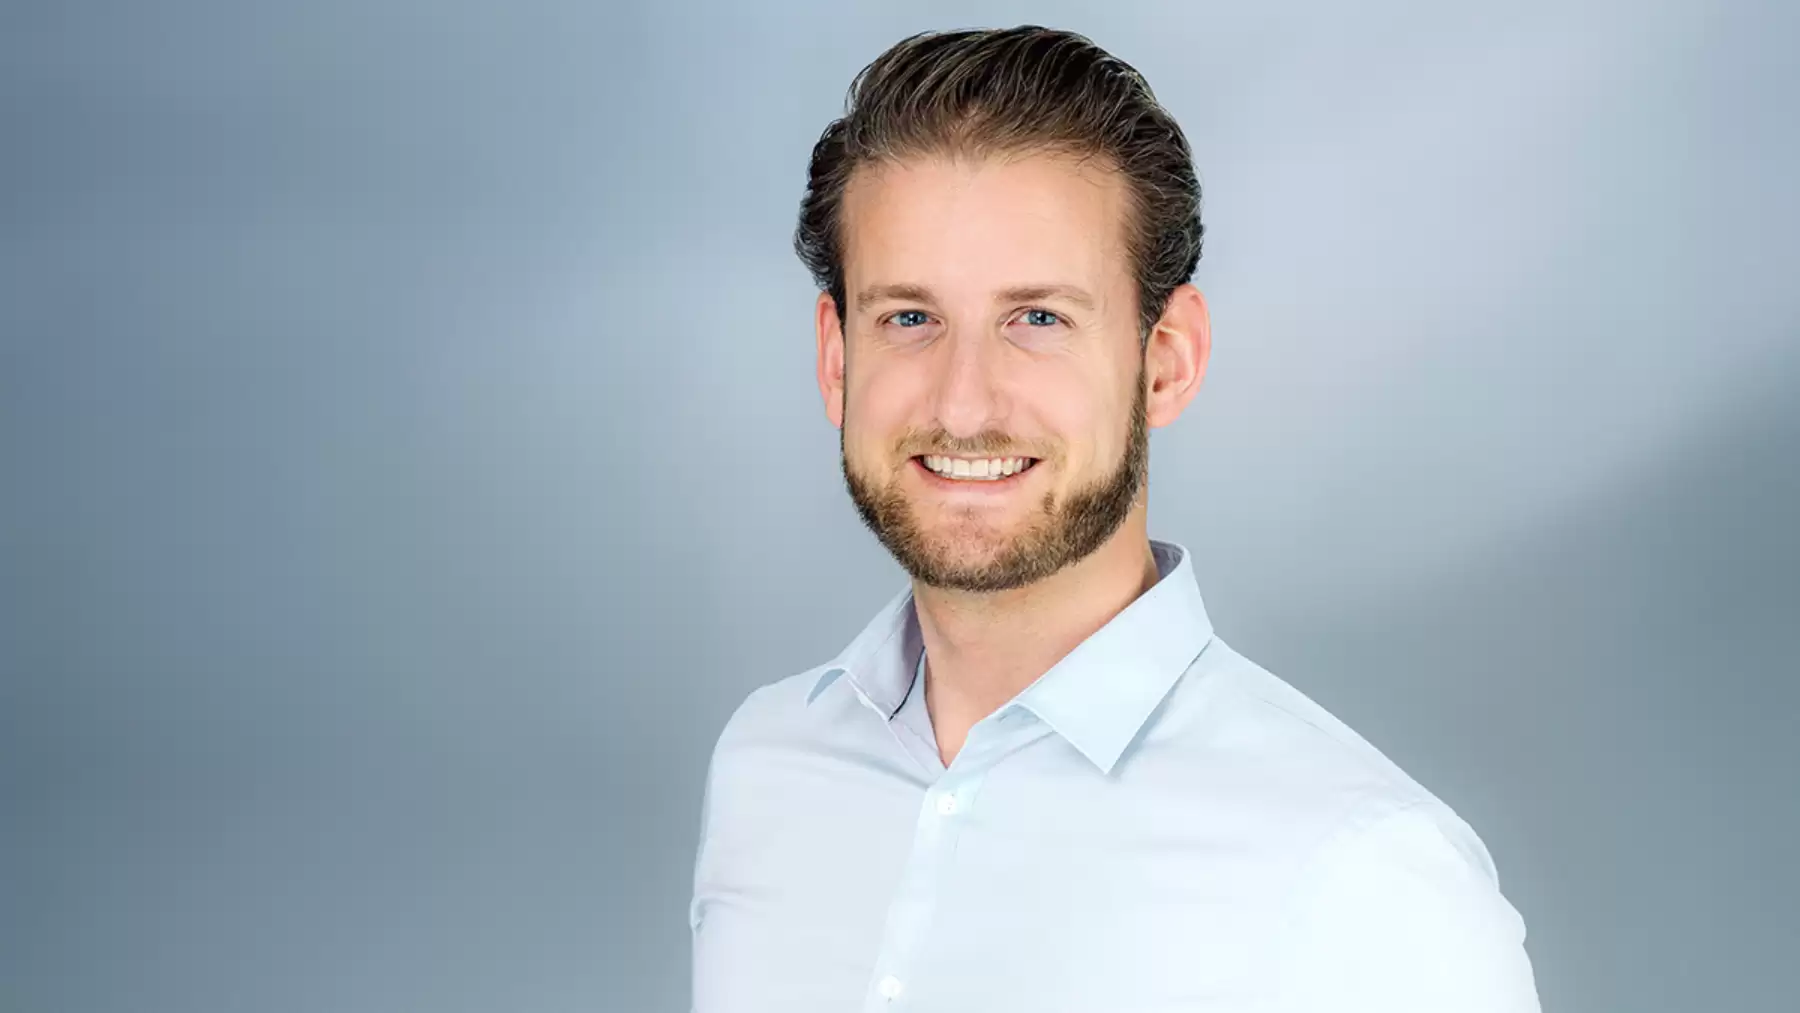 Tobias Küttel, owner and CEO of CryoSolutions AG